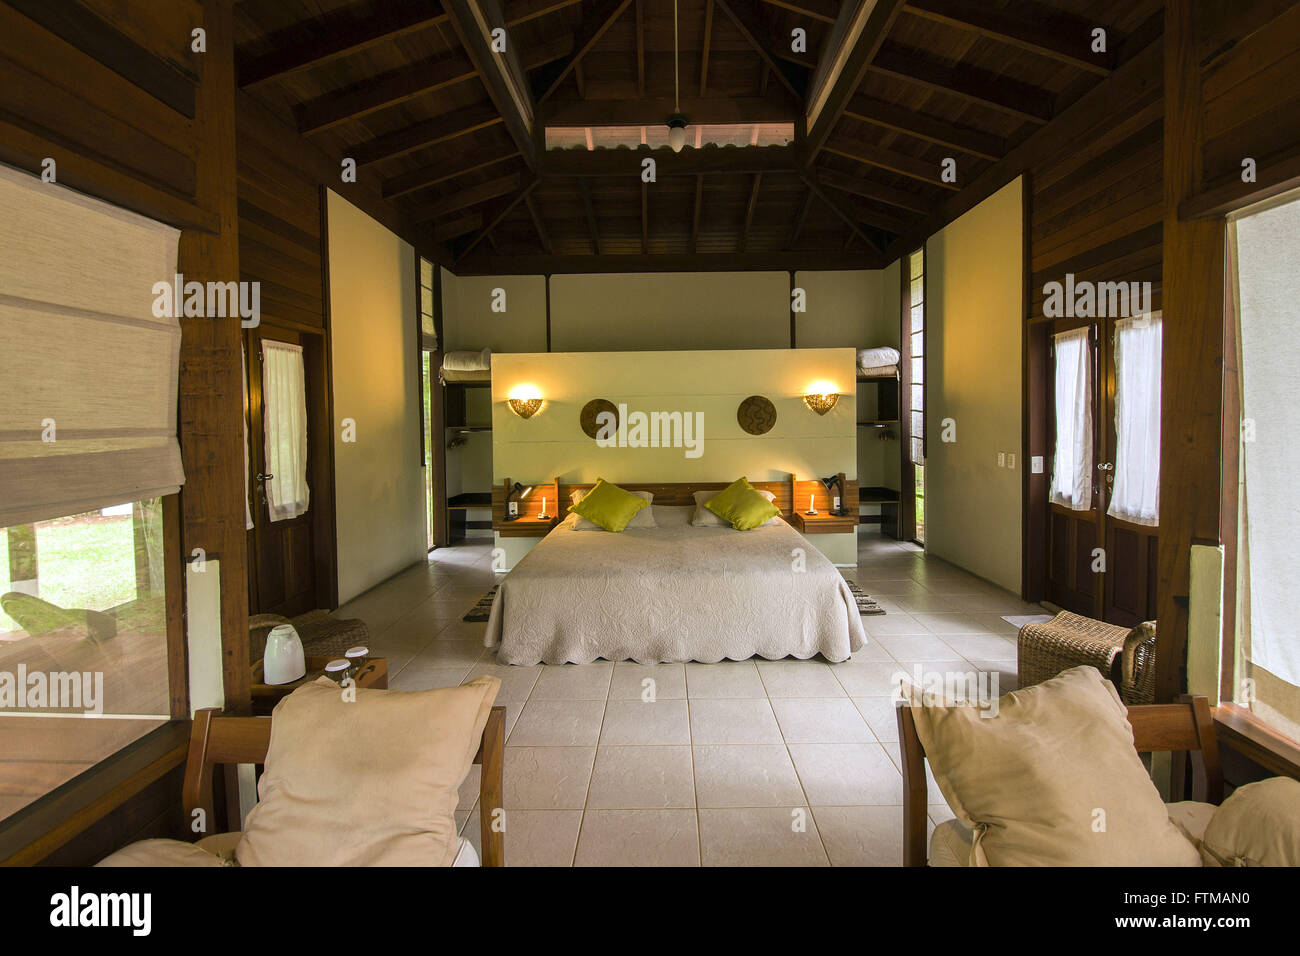 Hotel room installed in the Amazon forest Stock Photo